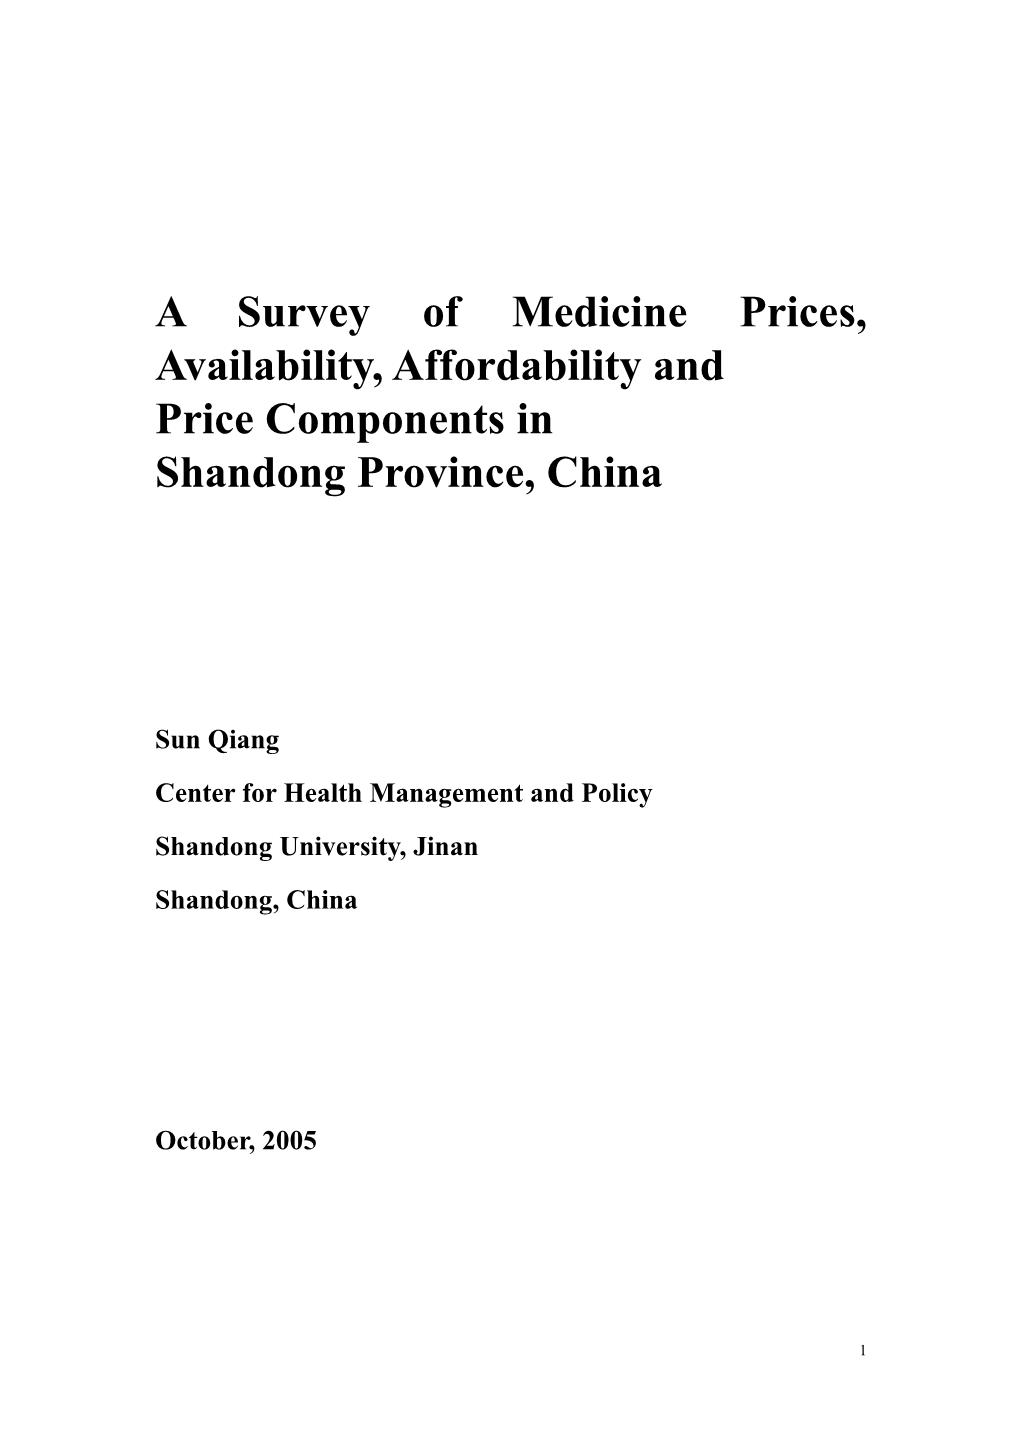 Medicine Price Survey Report in Shandong Province, China